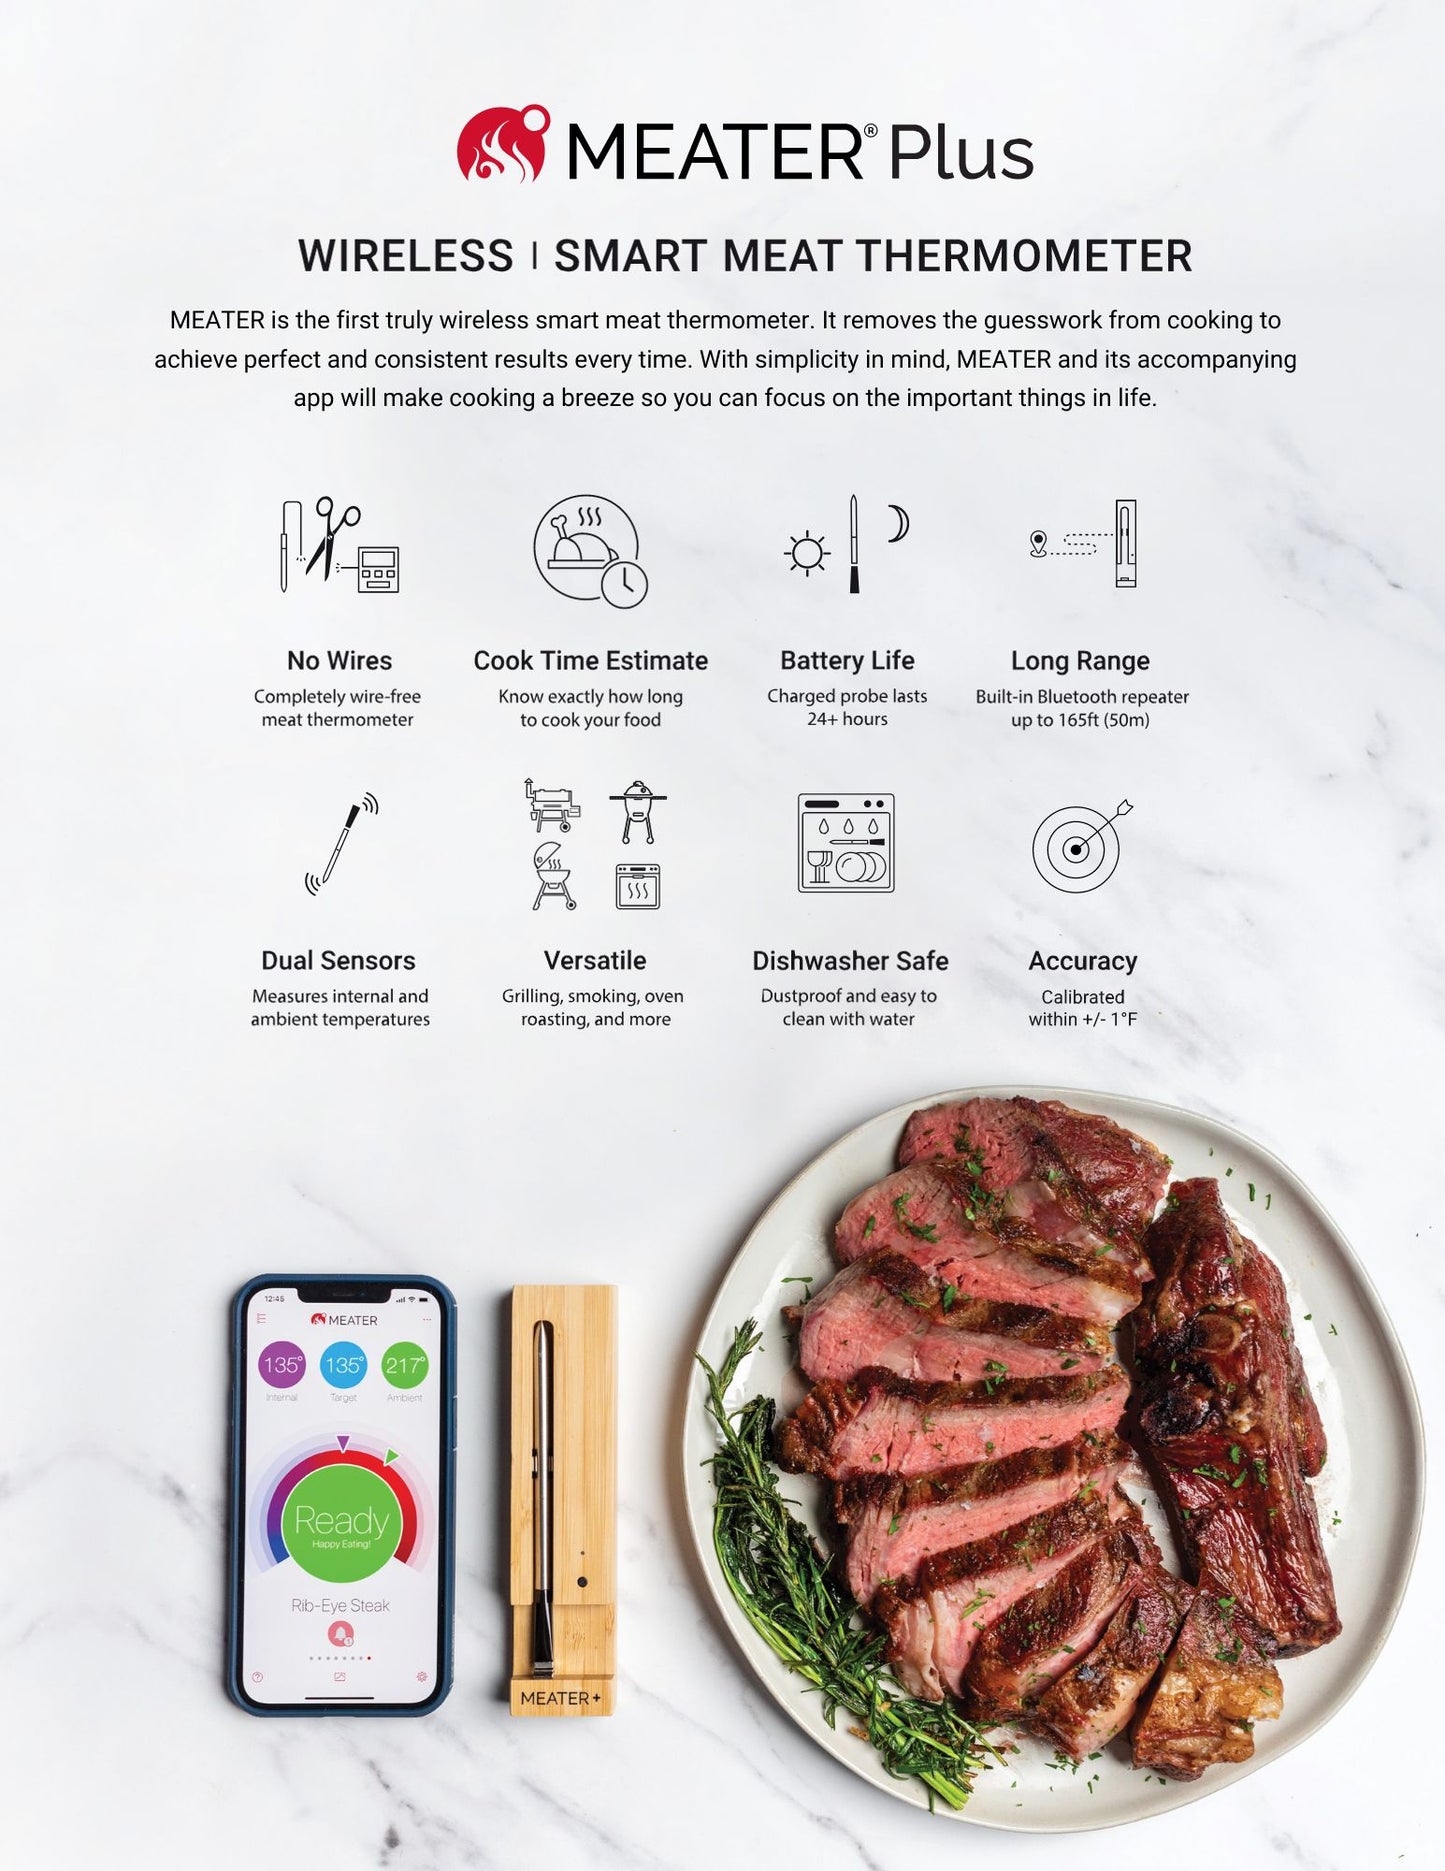 Meater Plus wireless thermometer predicts done time